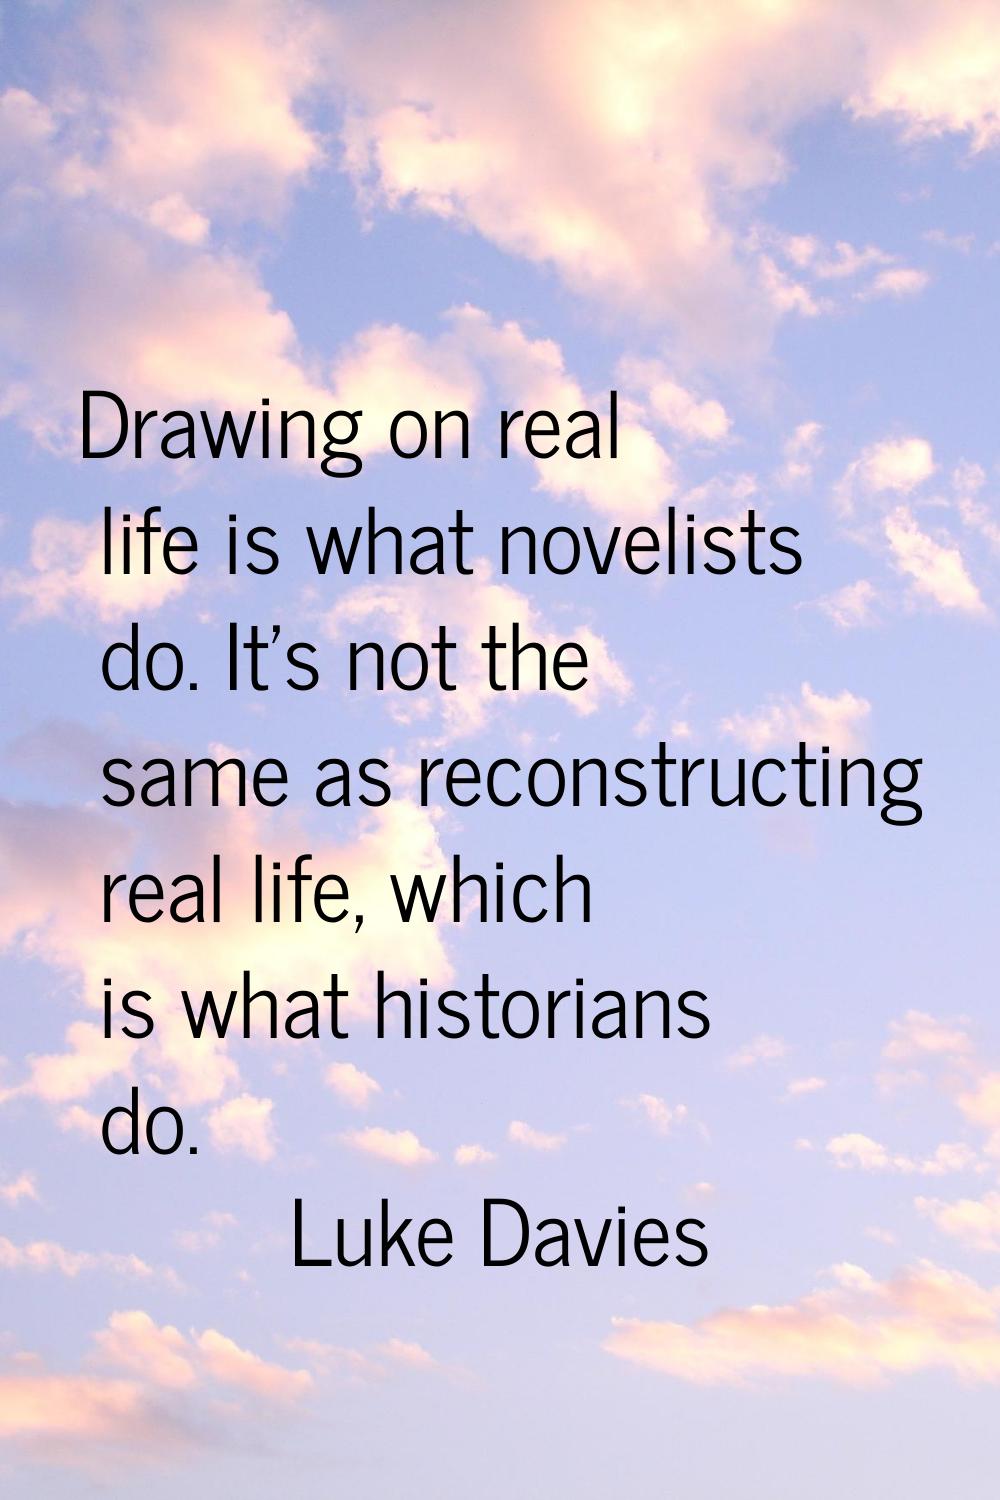 Drawing on real life is what novelists do. It's not the same as reconstructing real life, which is 